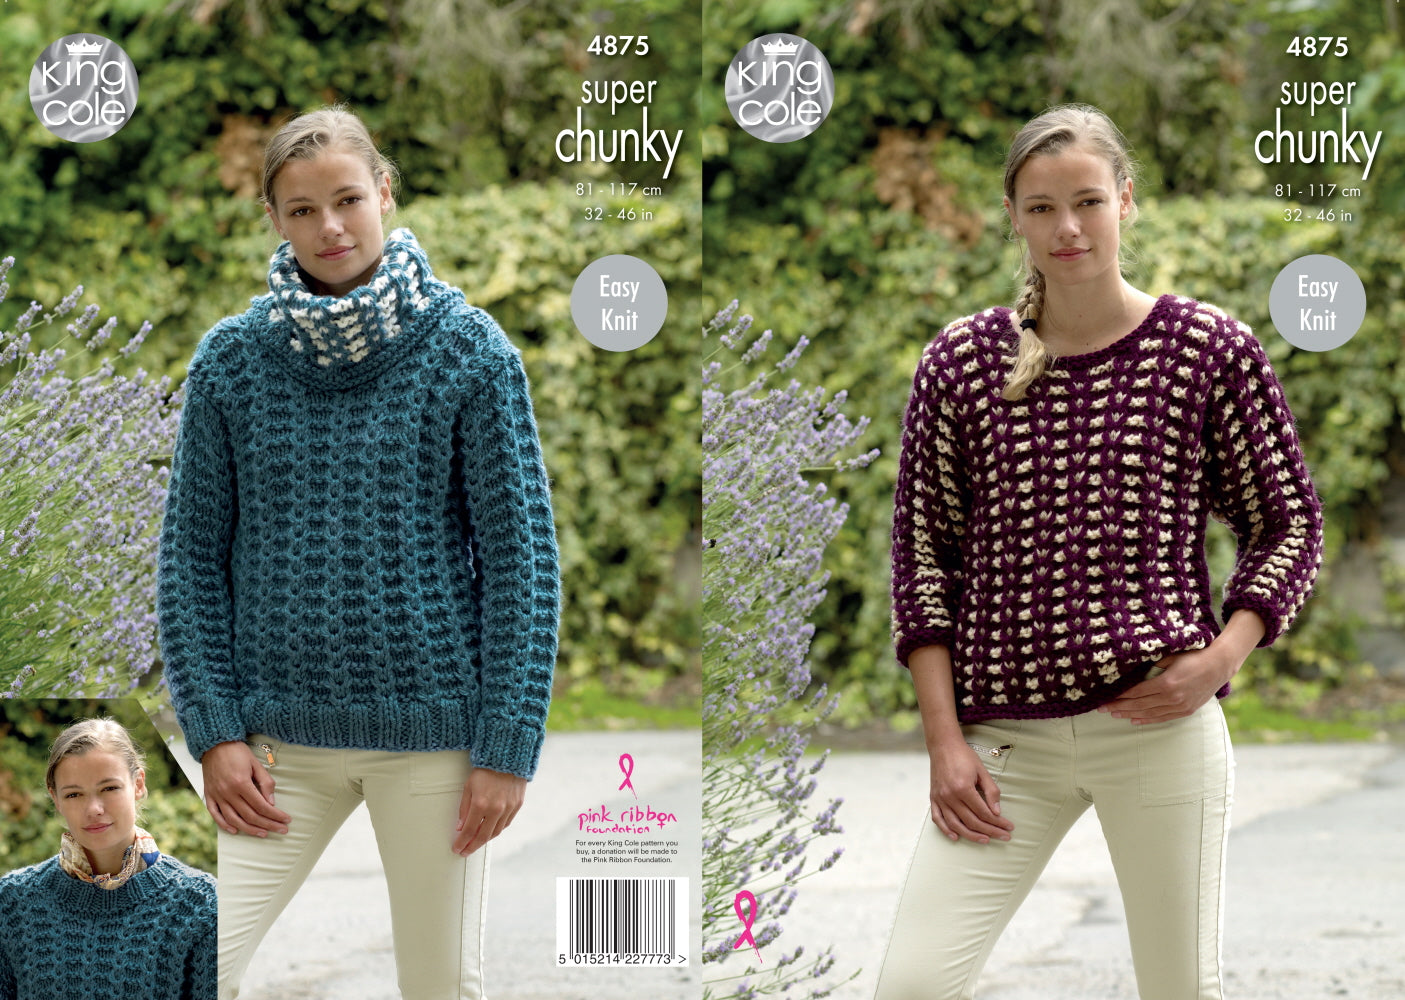 King Cole 4875 Adult Super Chunky Cowl Sweater Knitting Pattern